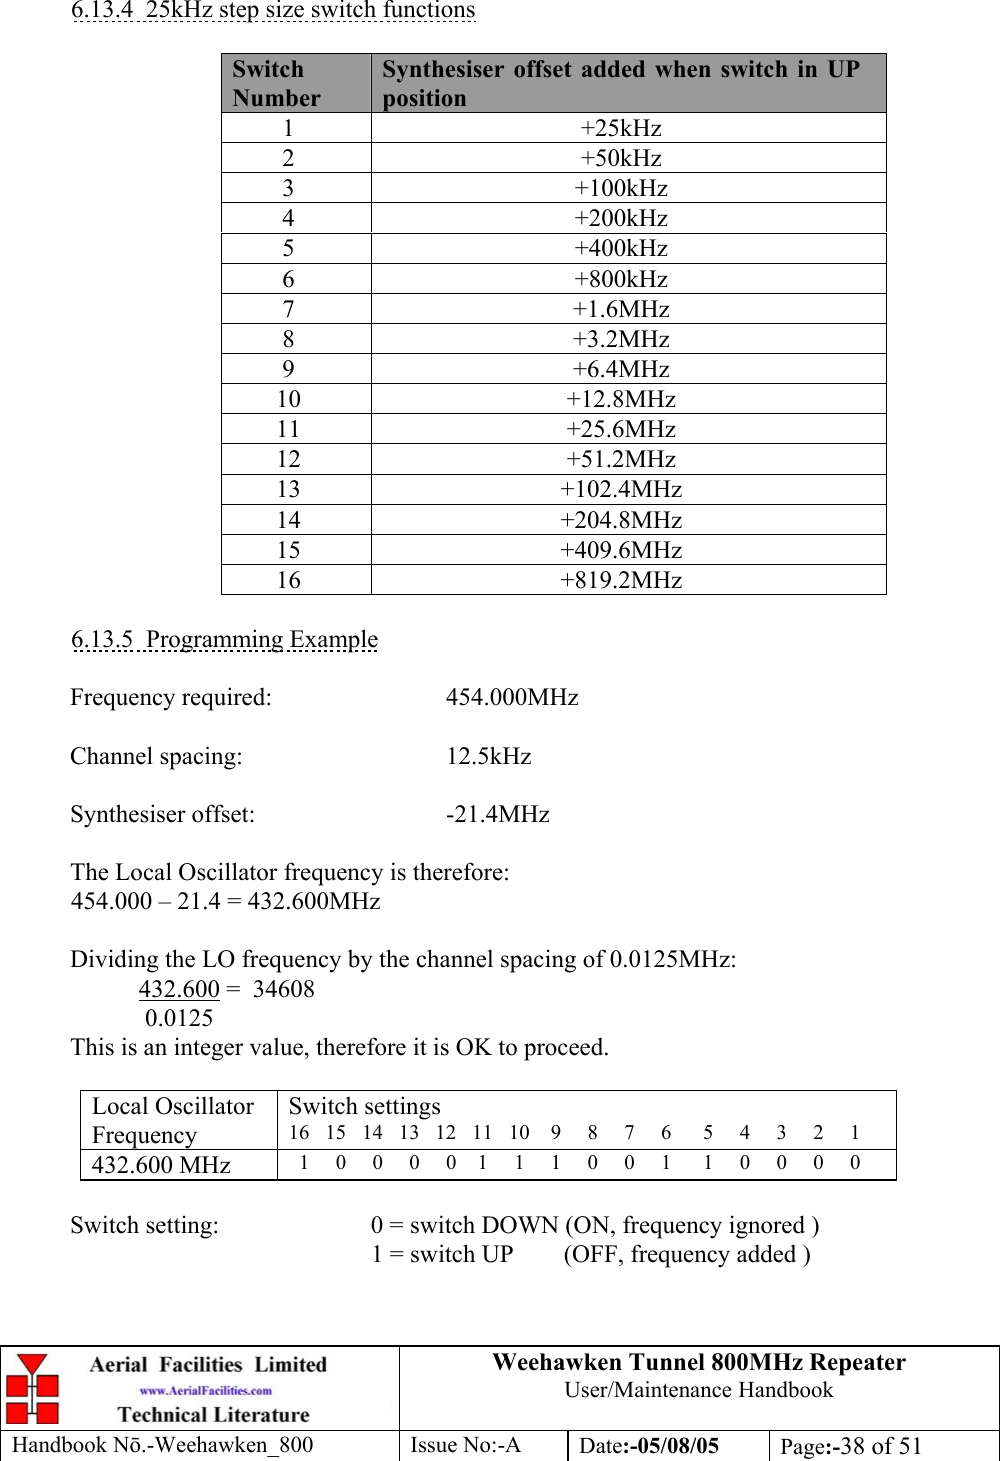 Weehawken Tunnel 800MHz Repeater User/Maintenance Handbook Handbook N.-Weehawken_800 Issue No:-A Date:-05/08/05  Page:-38 of 51    6.13.4  25kHz step size switch functions  Switch Number Synthesiser offset added when switch in UP position 1 +25kHz 2 +50kHz 3 +100kHz 4 +200kHz 5 +400kHz 6 +800kHz 7 +1.6MHz 8 +3.2MHz 9 +6.4MHz 10 +12.8MHz 11 +25.6MHz 12 +51.2MHz 13 +102.4MHz 14 +204.8MHz 15 +409.6MHz 16 +819.2MHz  6.13.5 Programming Example  Frequency required:   454.000MHz  Channel spacing:   12.5kHz  Synthesiser offset:   -21.4MHz  The Local Oscillator frequency is therefore:   454.000 – 21.4 = 432.600MHz  Dividing the LO frequency by the channel spacing of 0.0125MHz:            432.600 =  34608              0.0125 This is an integer value, therefore it is OK to proceed.  Local Oscillator  Frequency Switch settings 16   15   14   13   12   11   10    9     8     7     6      5     4     3     2     1 432.600 MHz    1     0     0     0     0    1     1     1     0     0     1      1     0     0     0     0  Switch setting:     0 = switch DOWN (ON, frequency ignored )          1 = switch UP        (OFF, frequency added )  